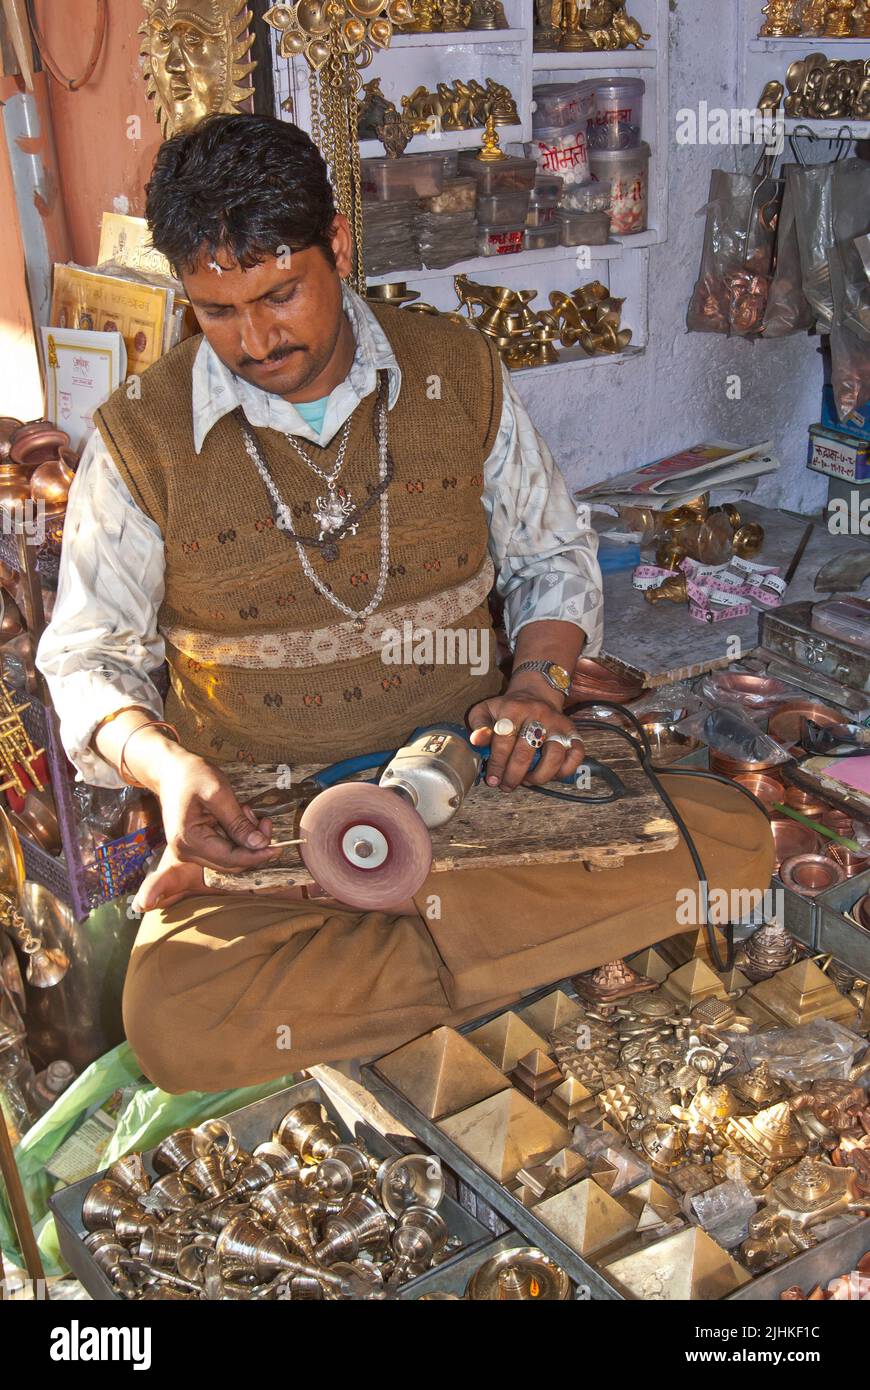 Shining Copper and golden artifacts, India Stock Photo